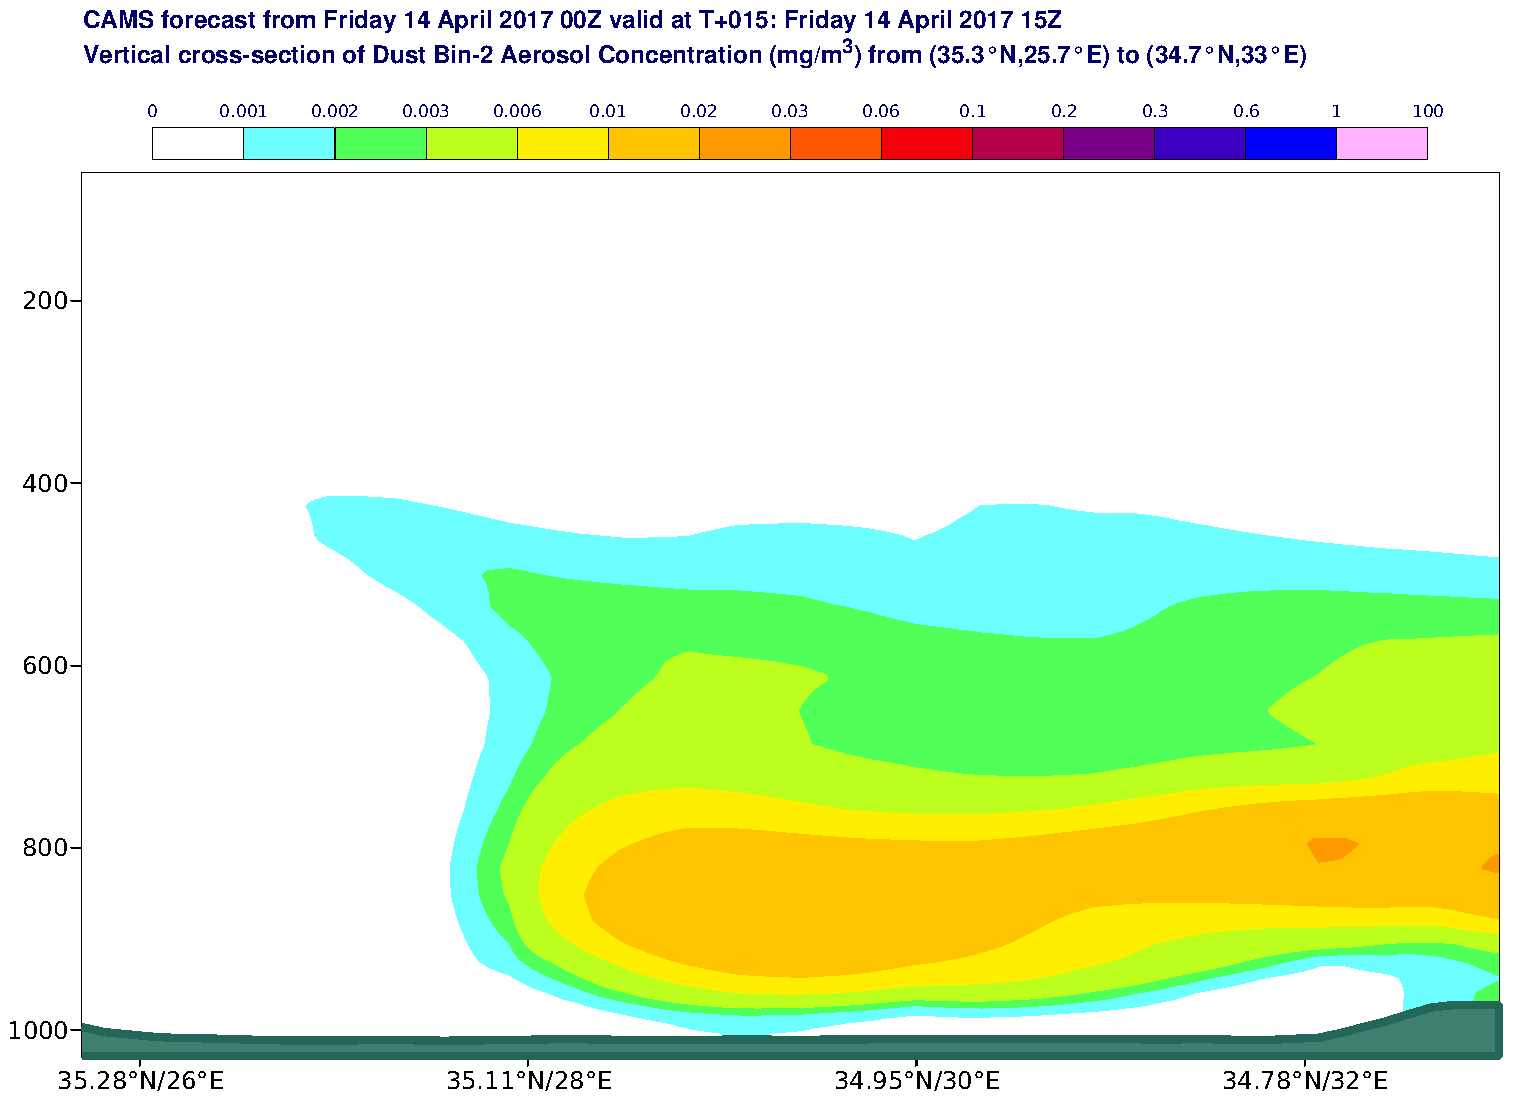 Vertical cross-section of Dust Bin-2 Aerosol Concentration (mg/m3) valid at T15 - 2017-04-14 15:00